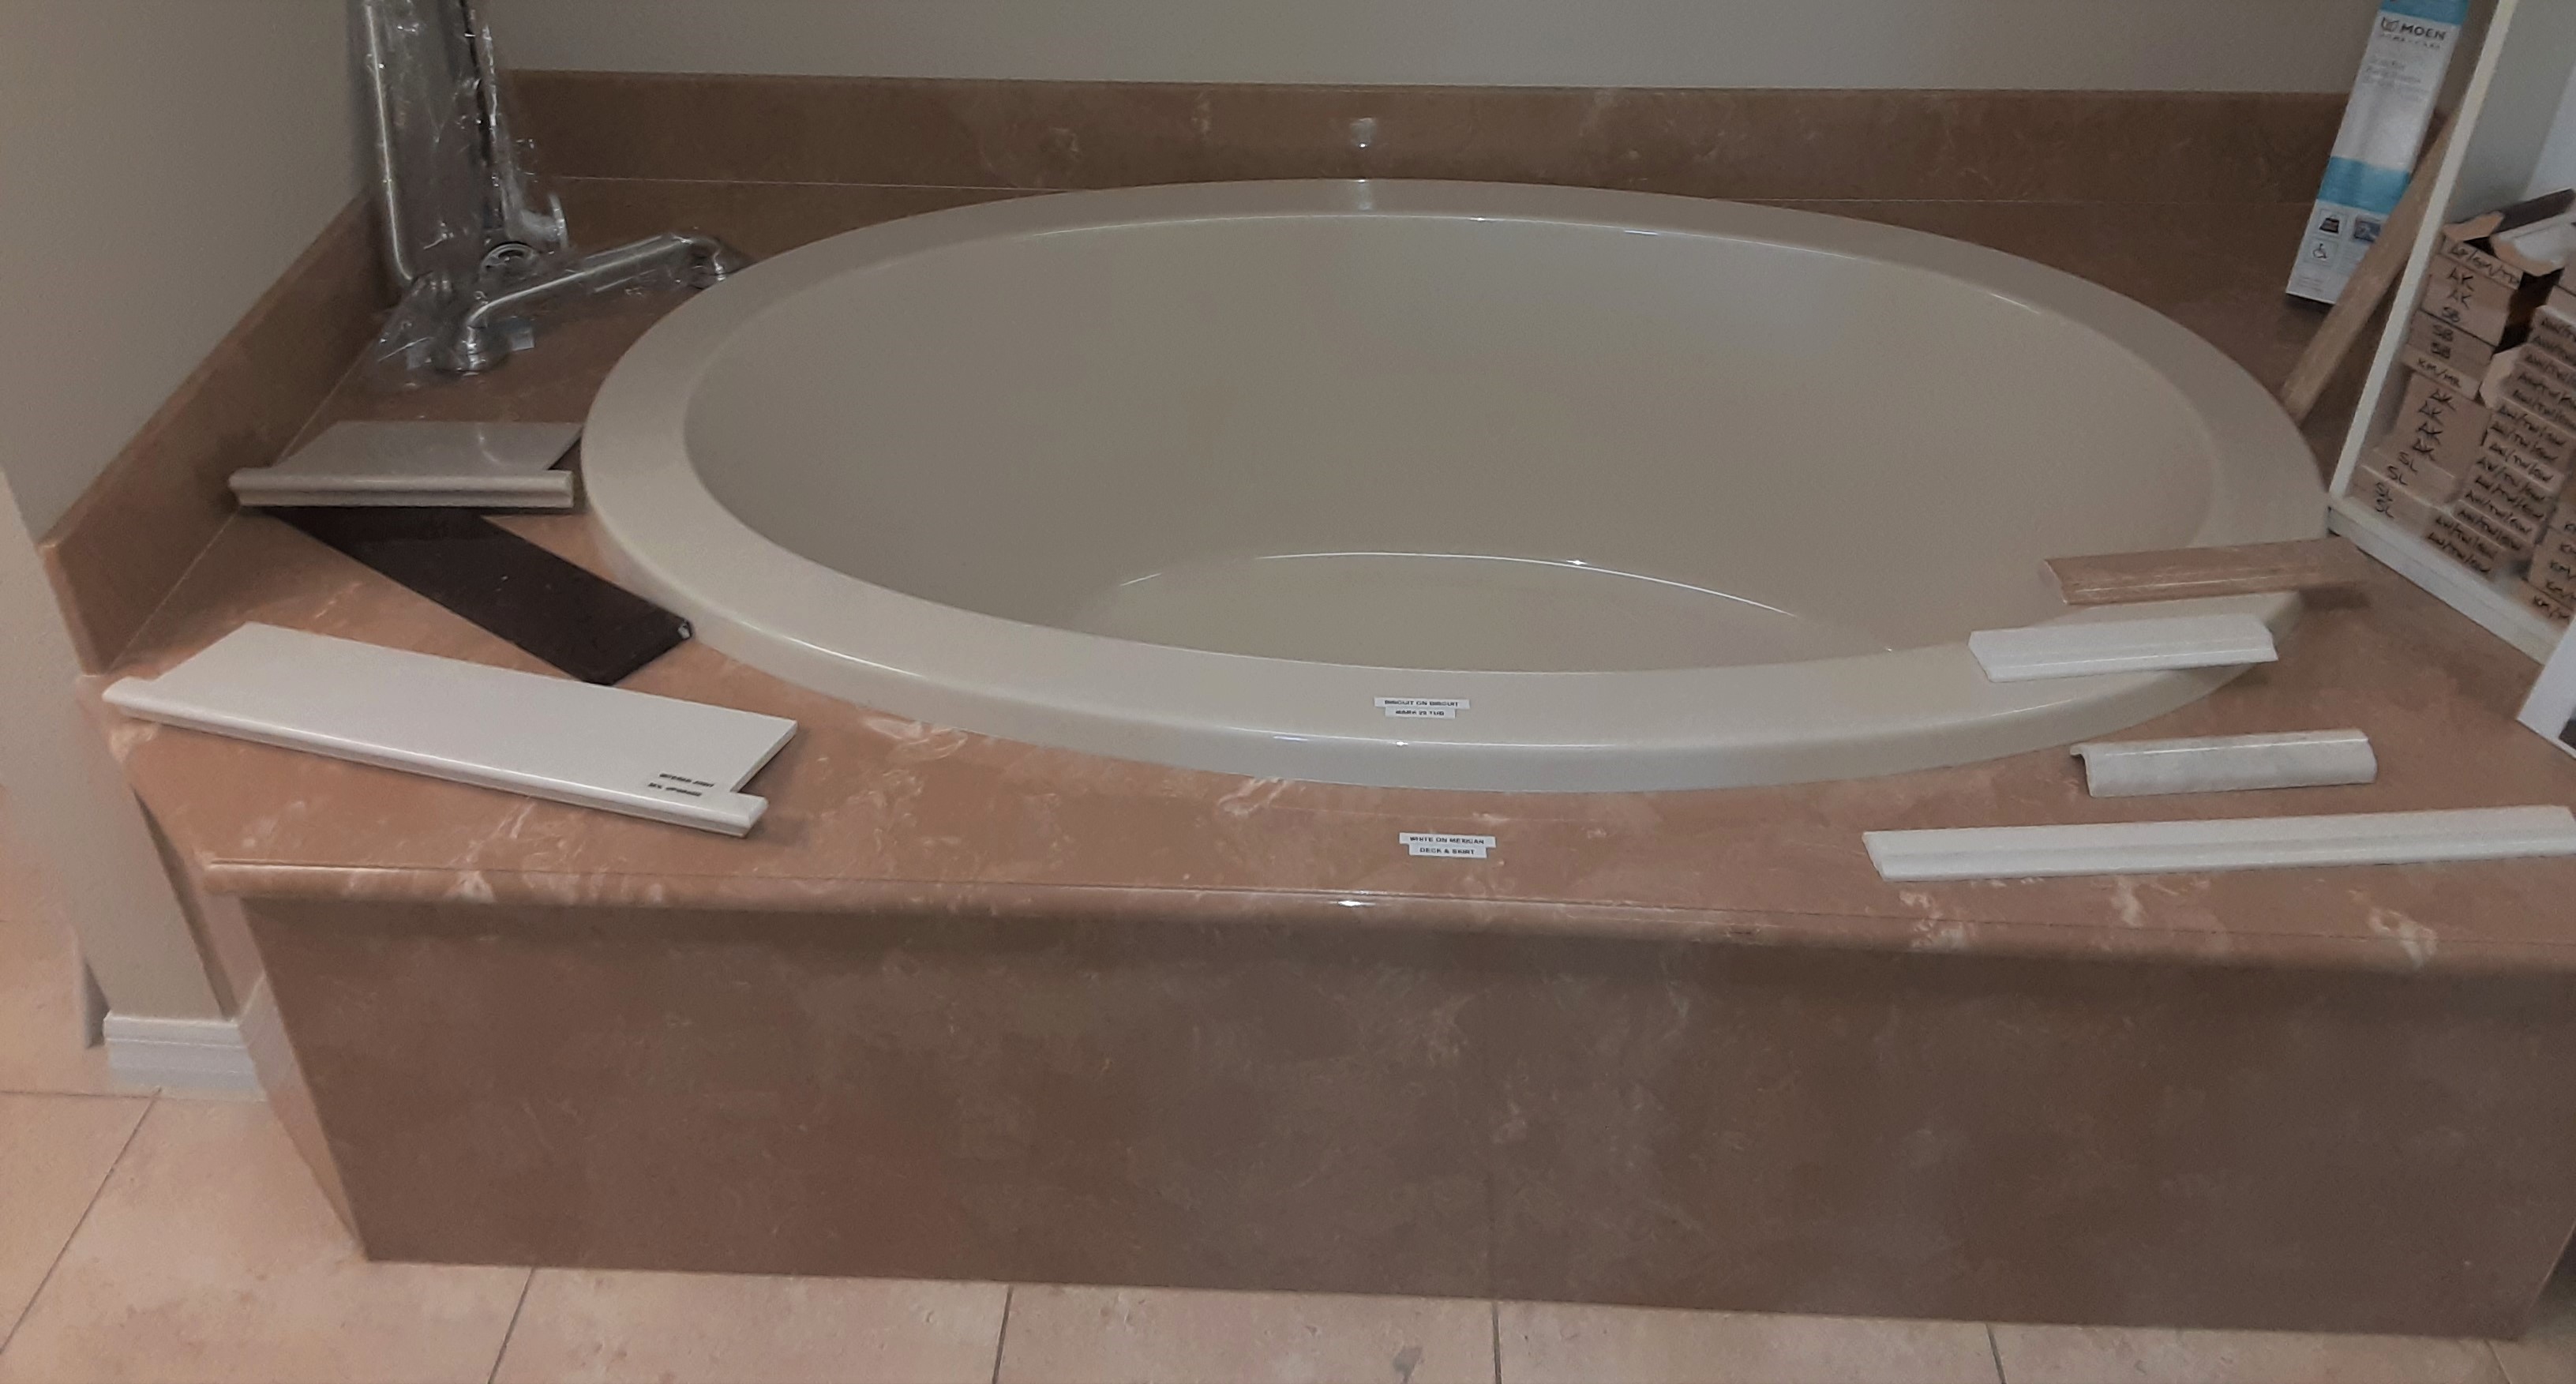 Marlin Marble Cultured, Cultured Marble Bathtub Cost